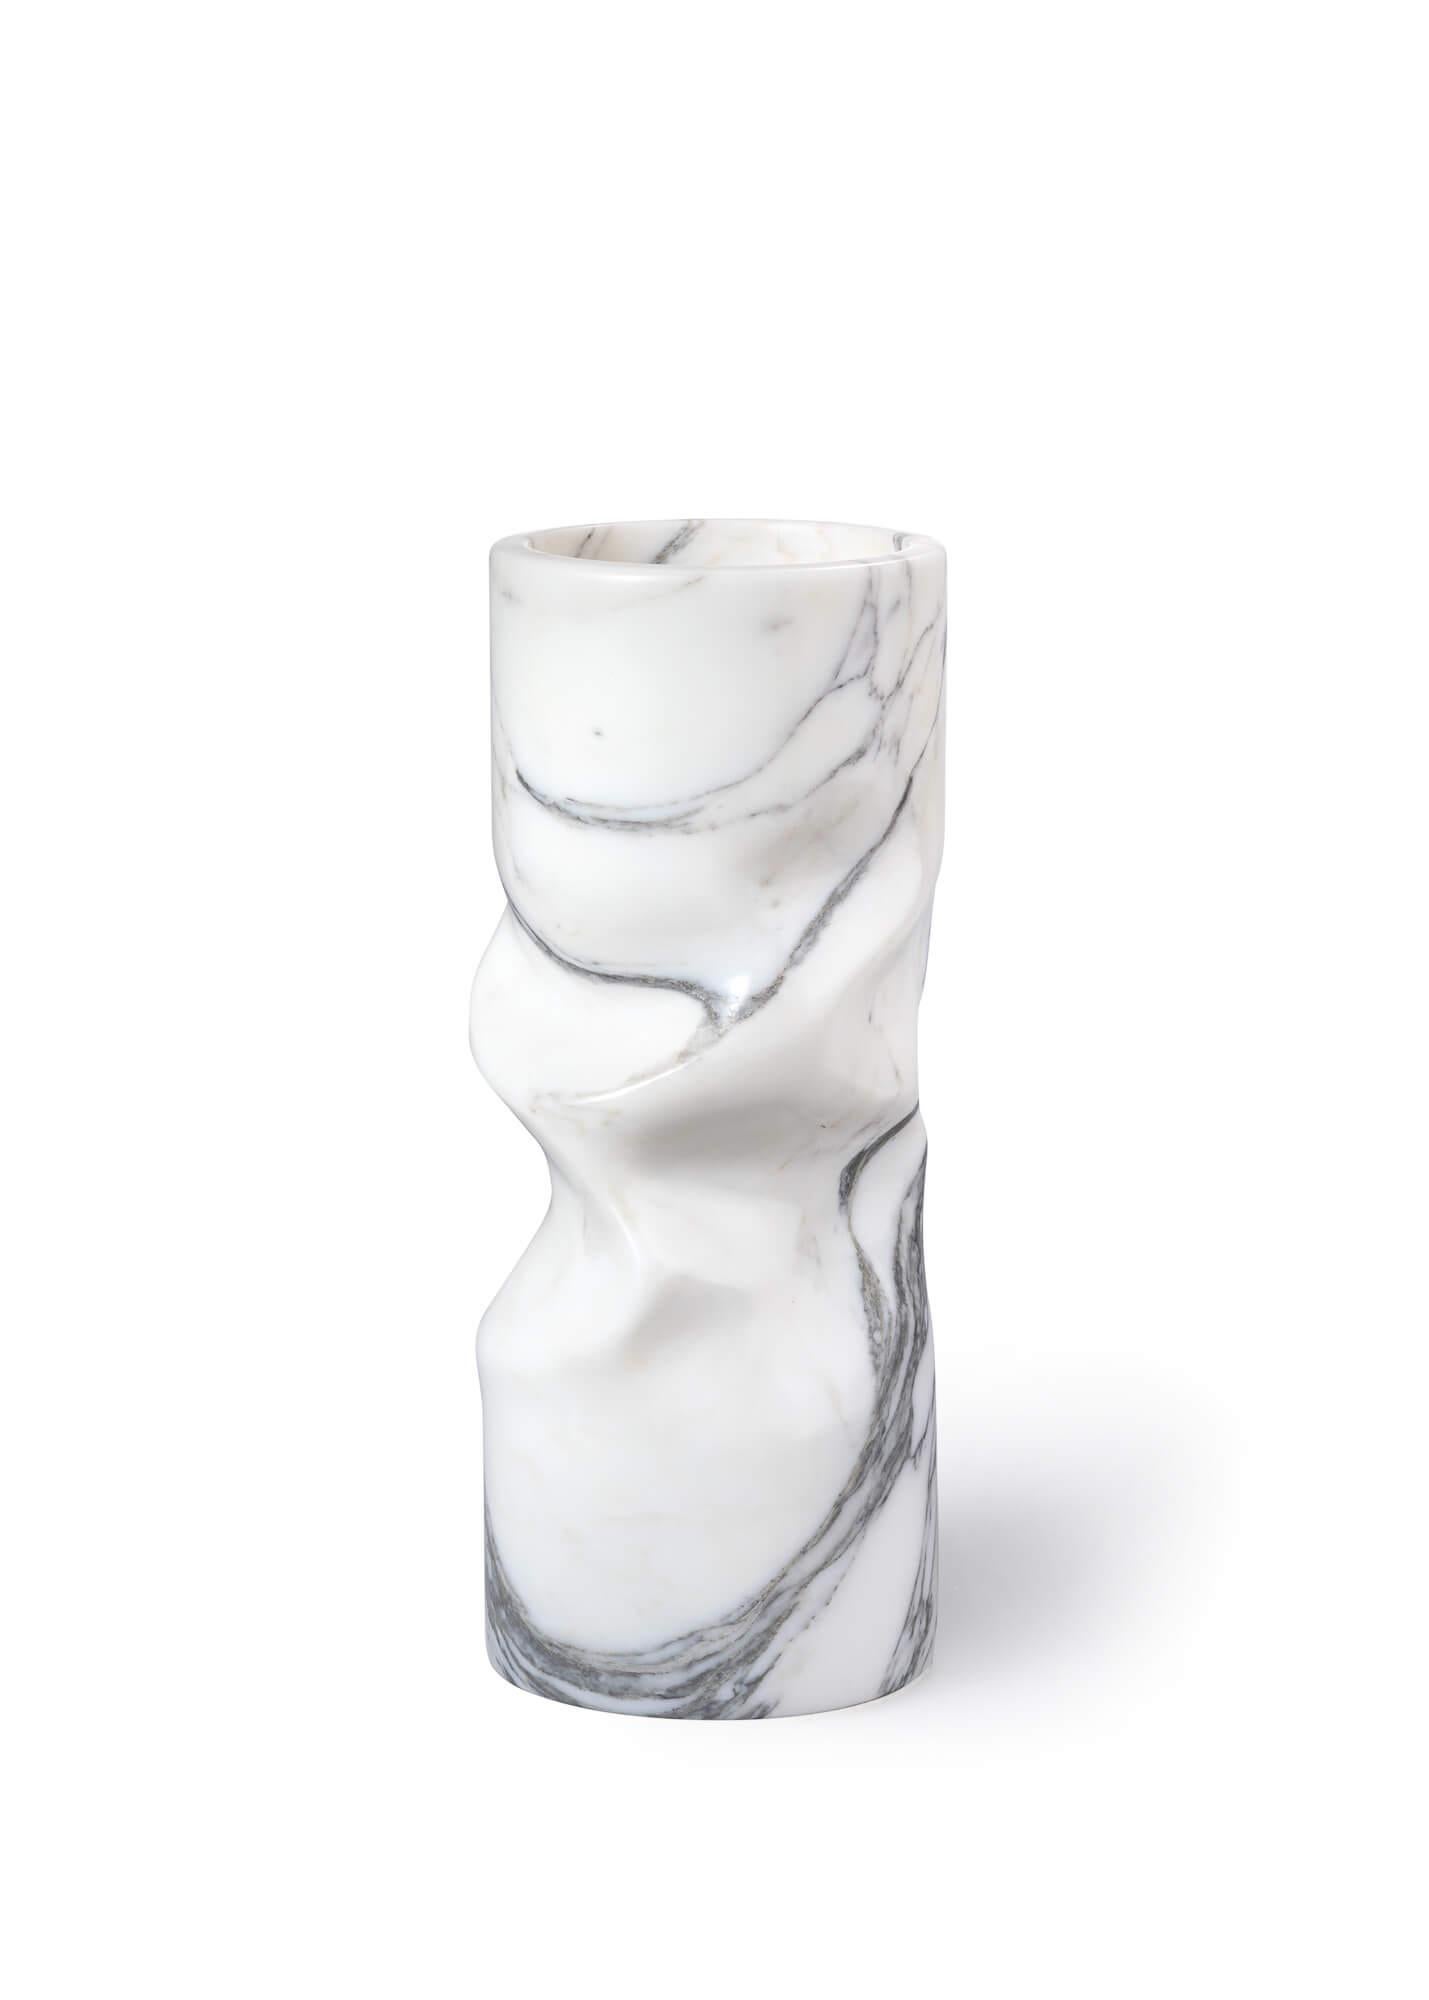 The Upcycled Marble Vase, available in a super-limited edition, presents a fusion of playful design and complex manufacturing methods, combining part machine and part handcrafting in a small workshop in Italy.

Distinctive in its crumpled shape,